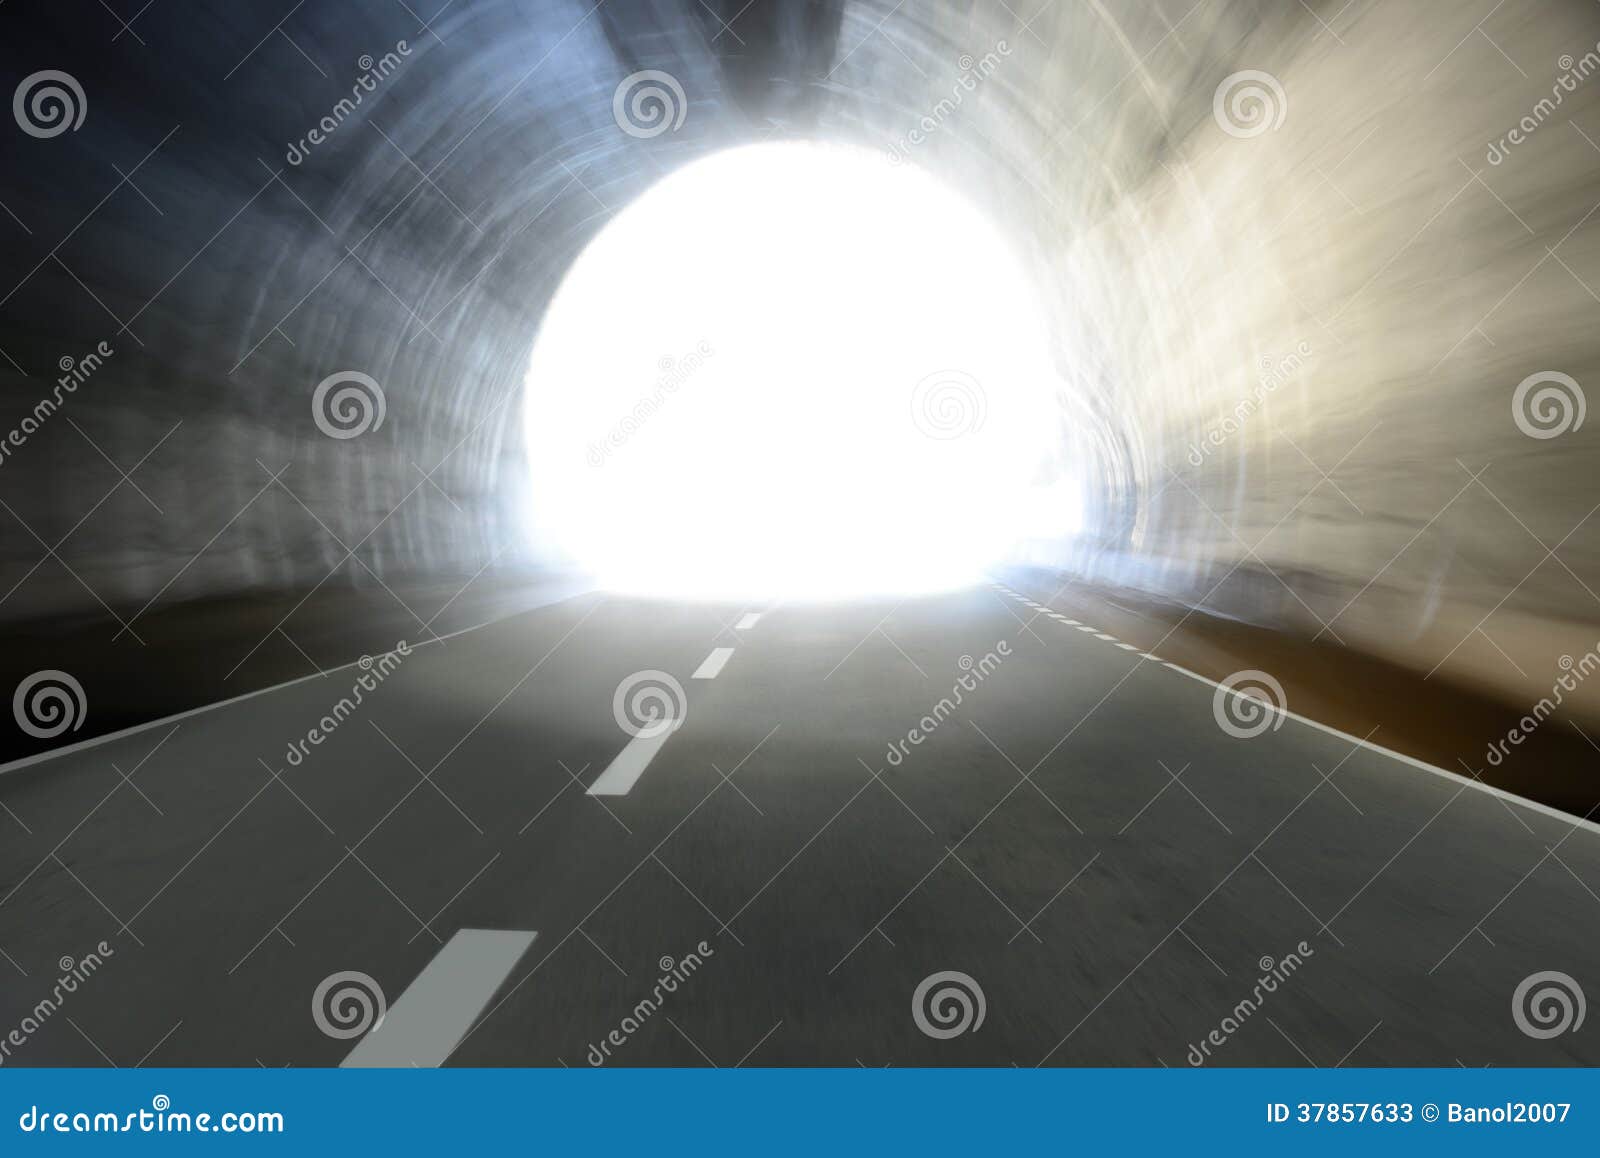 light at end of tunnel.